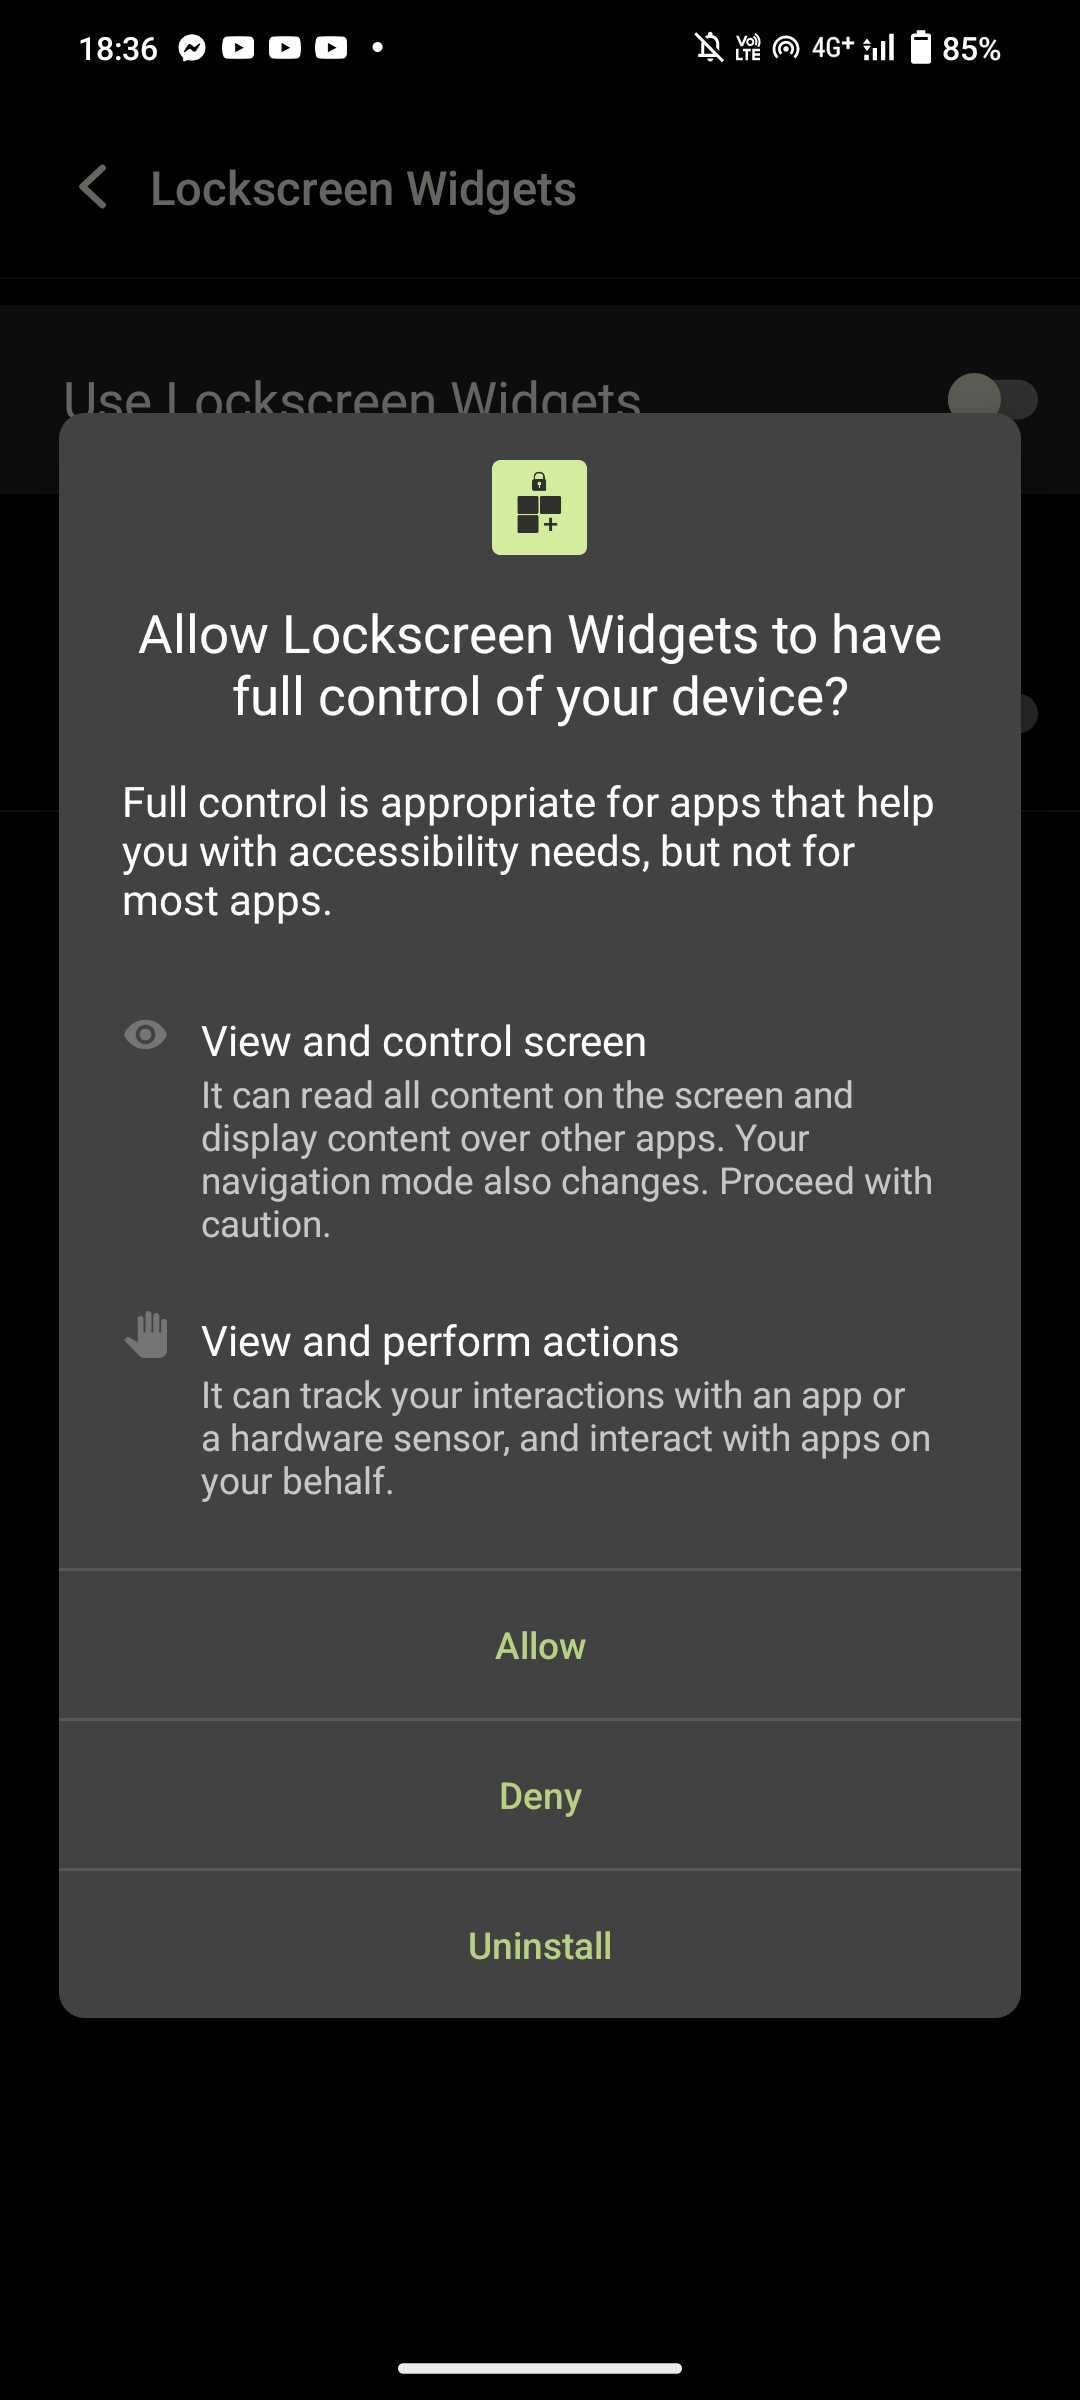 Allowing Lockscreen Widgets in Android Accessibility settings